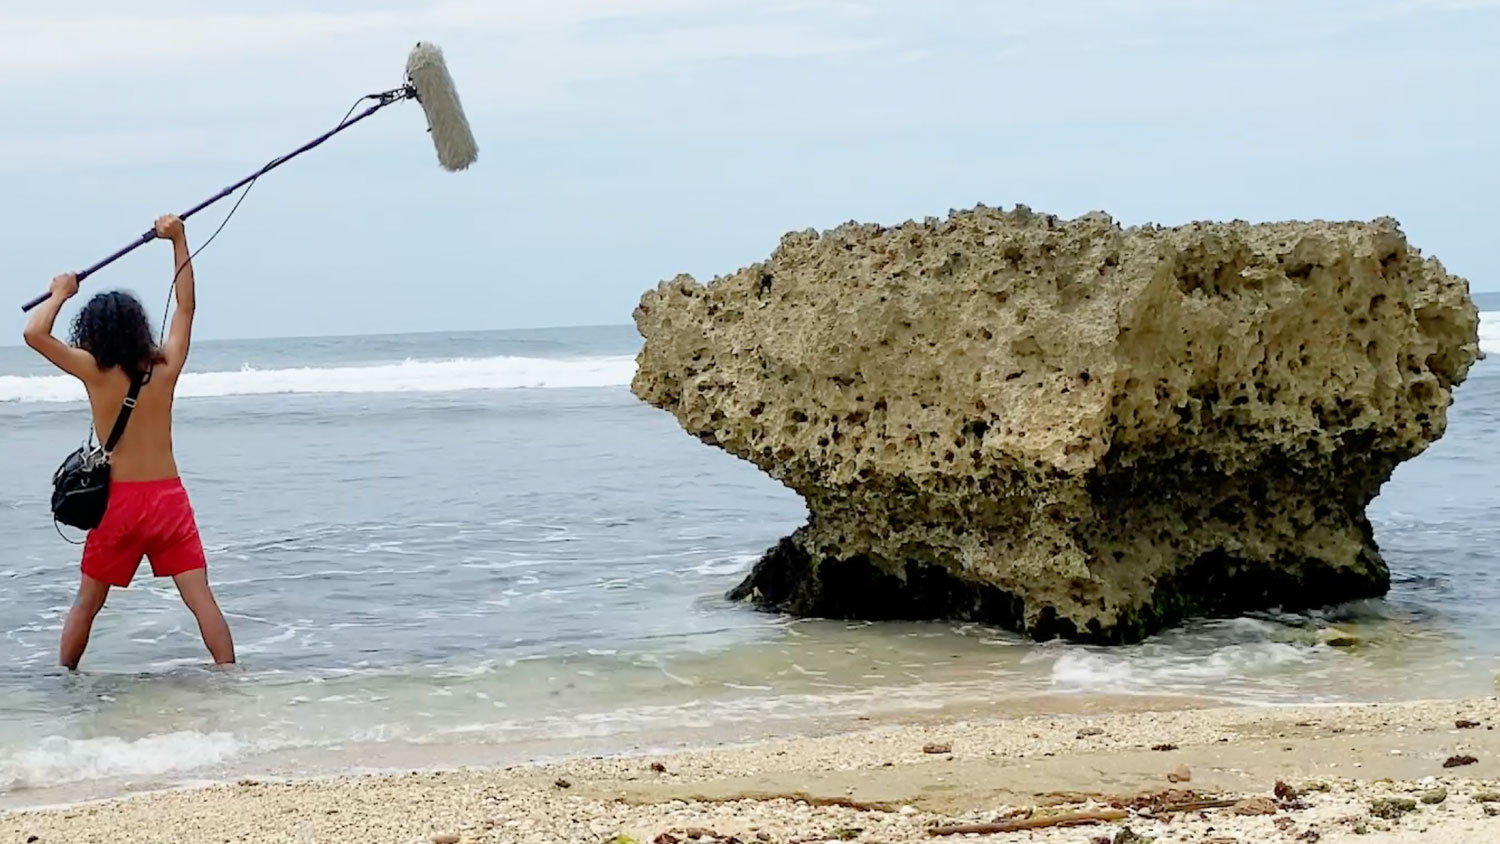 a shirtless person holding a boom microphone above the surf near a rock covered in barnacles